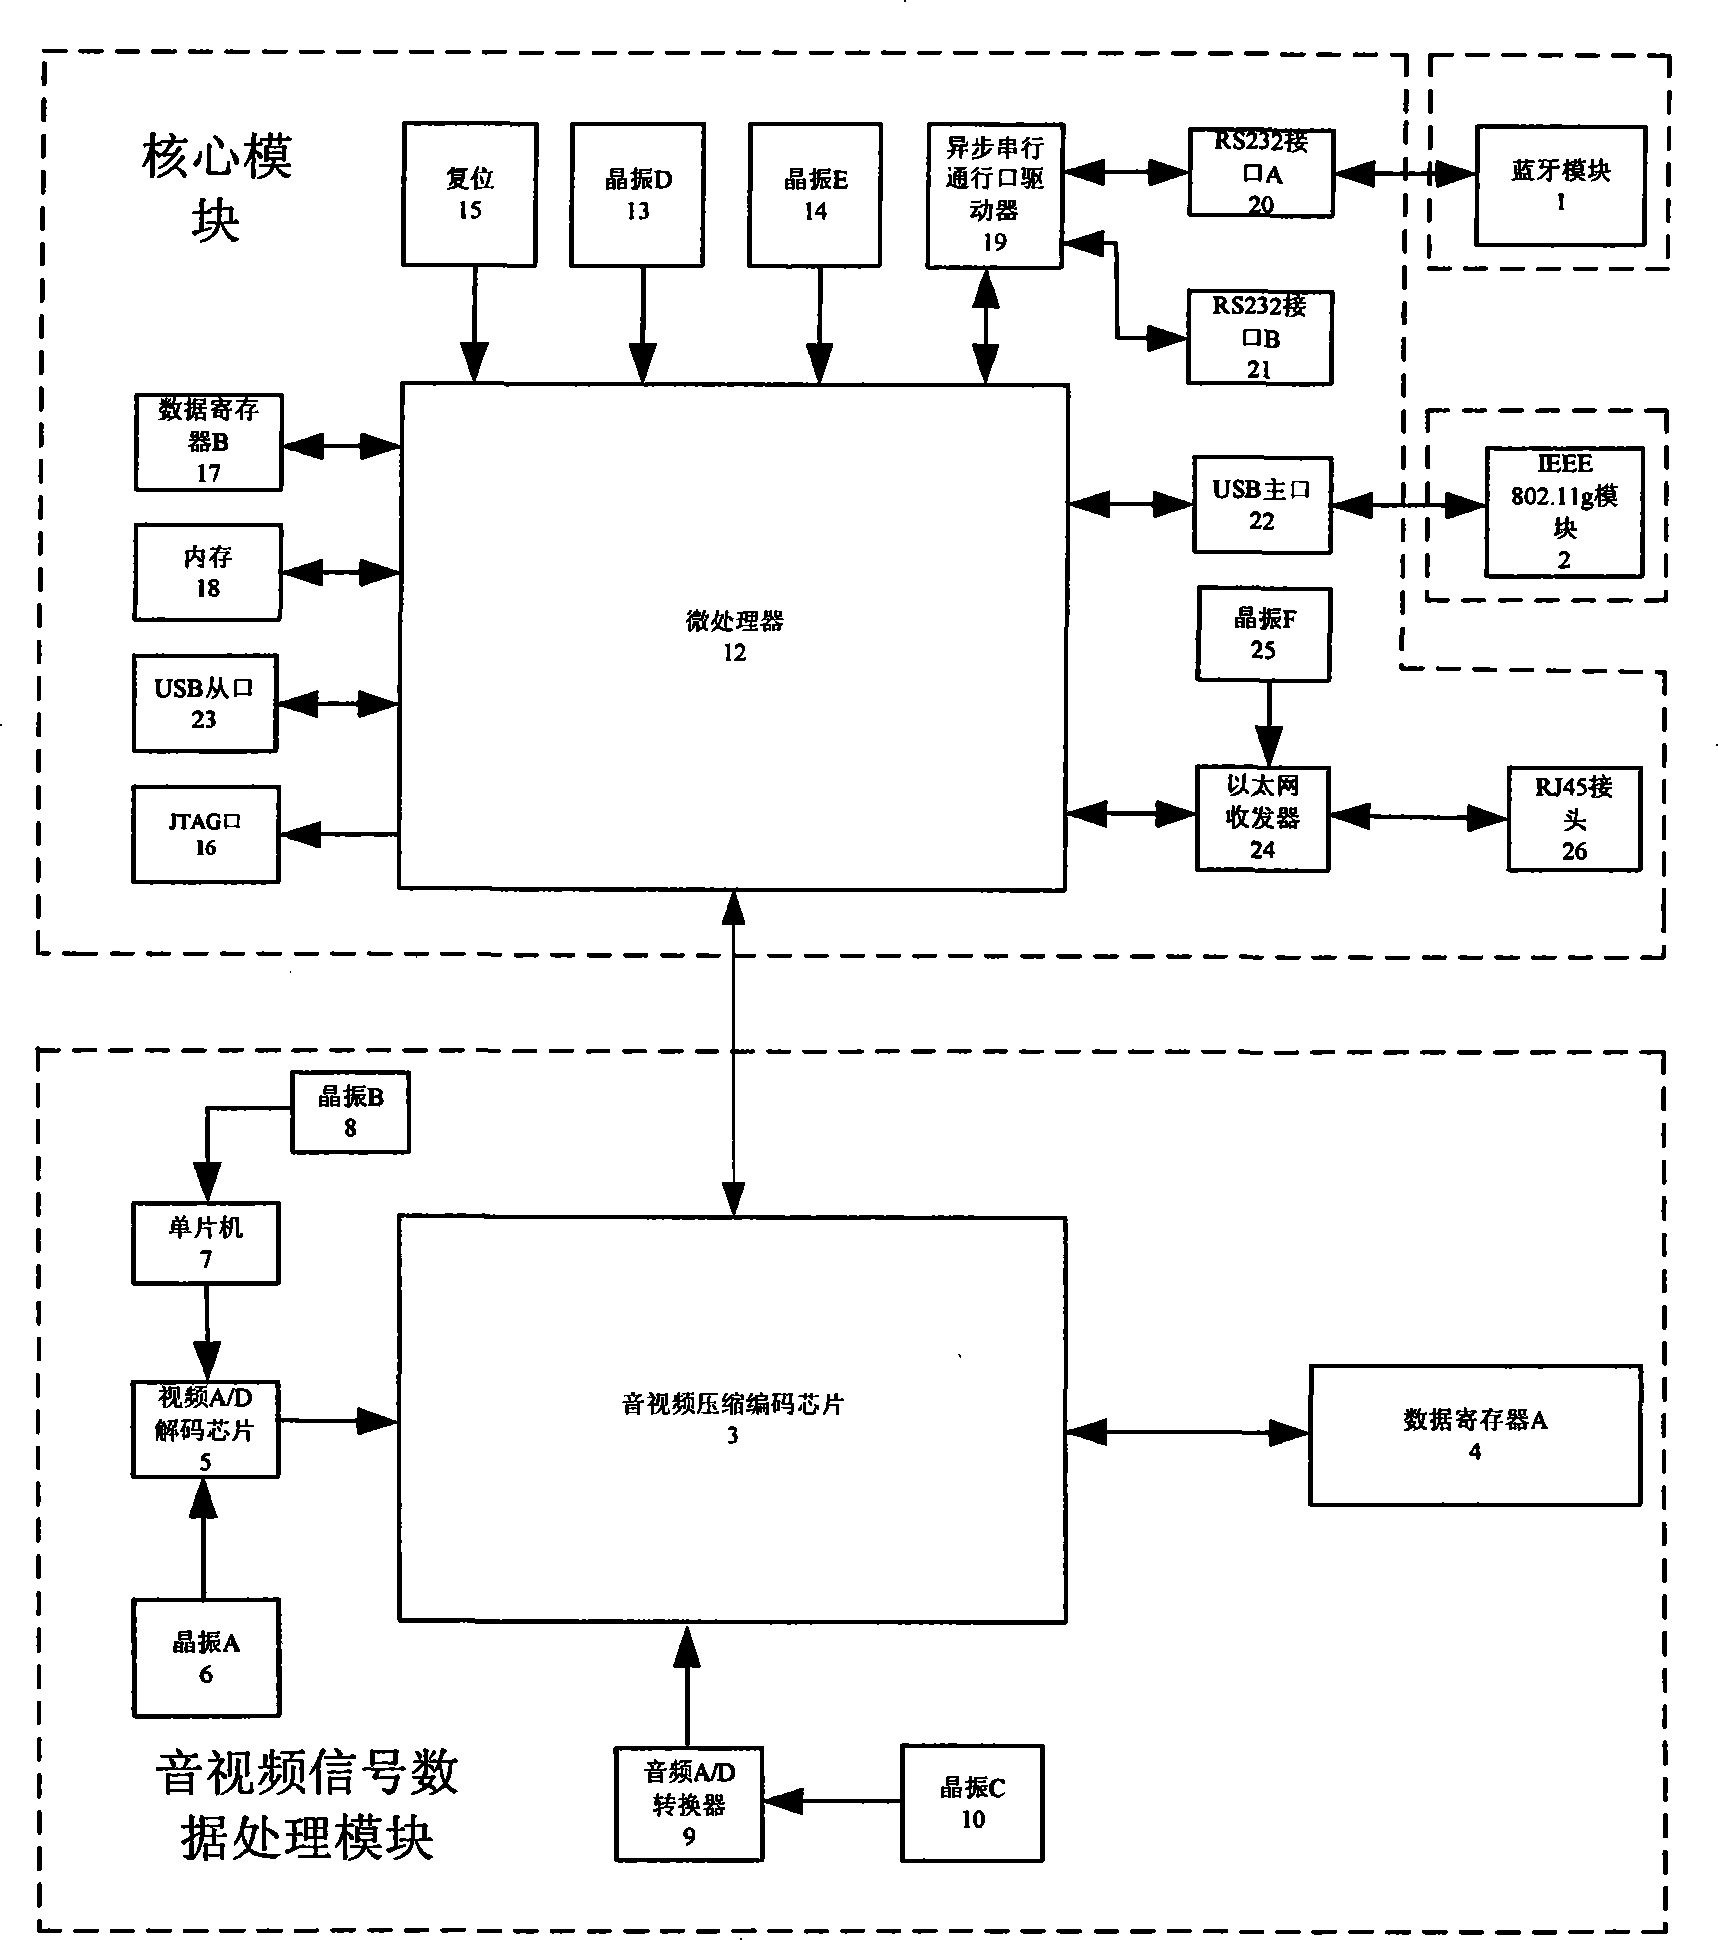 Embedded type household network gateway supporting wireless audio and video transmissions